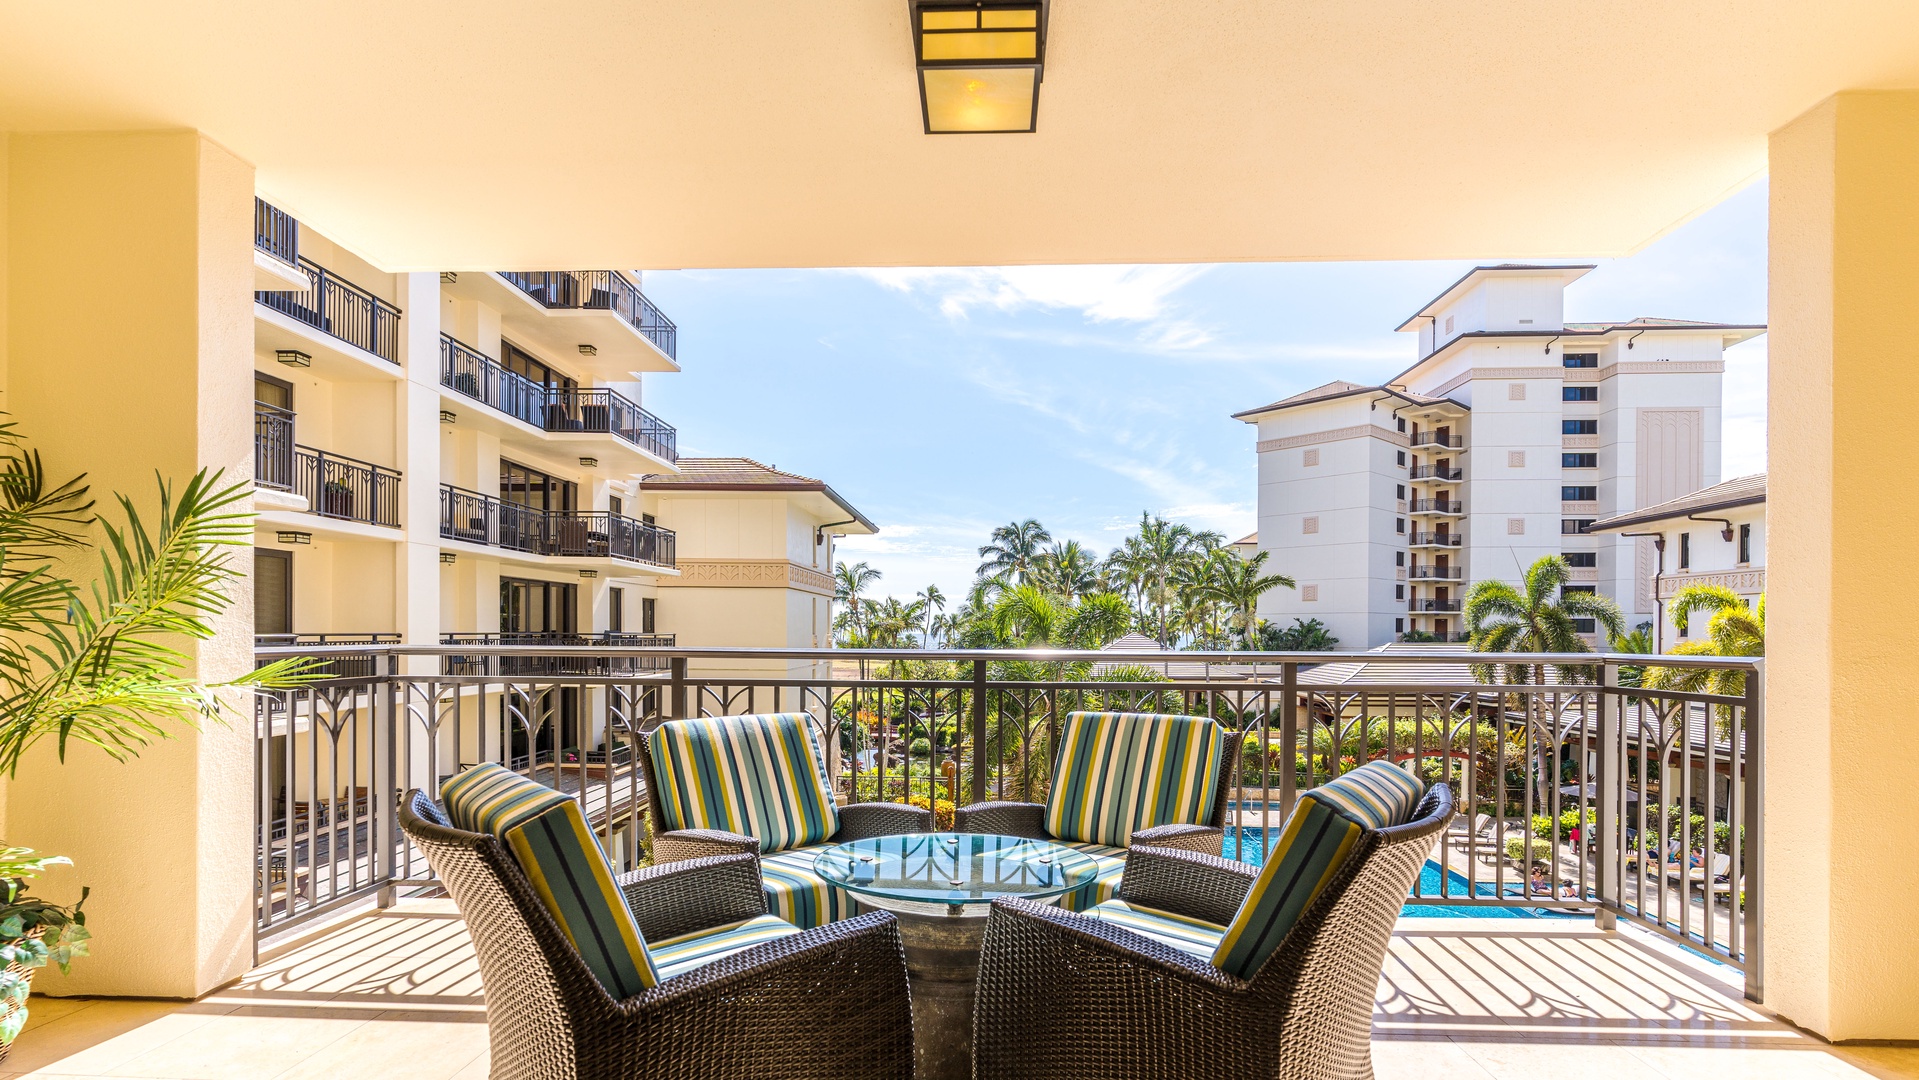 Kapolei Vacation Rentals, Ko Olina Beach Villas O305 - The indoor dining and the outdoor dining areas provide plenty of seating.